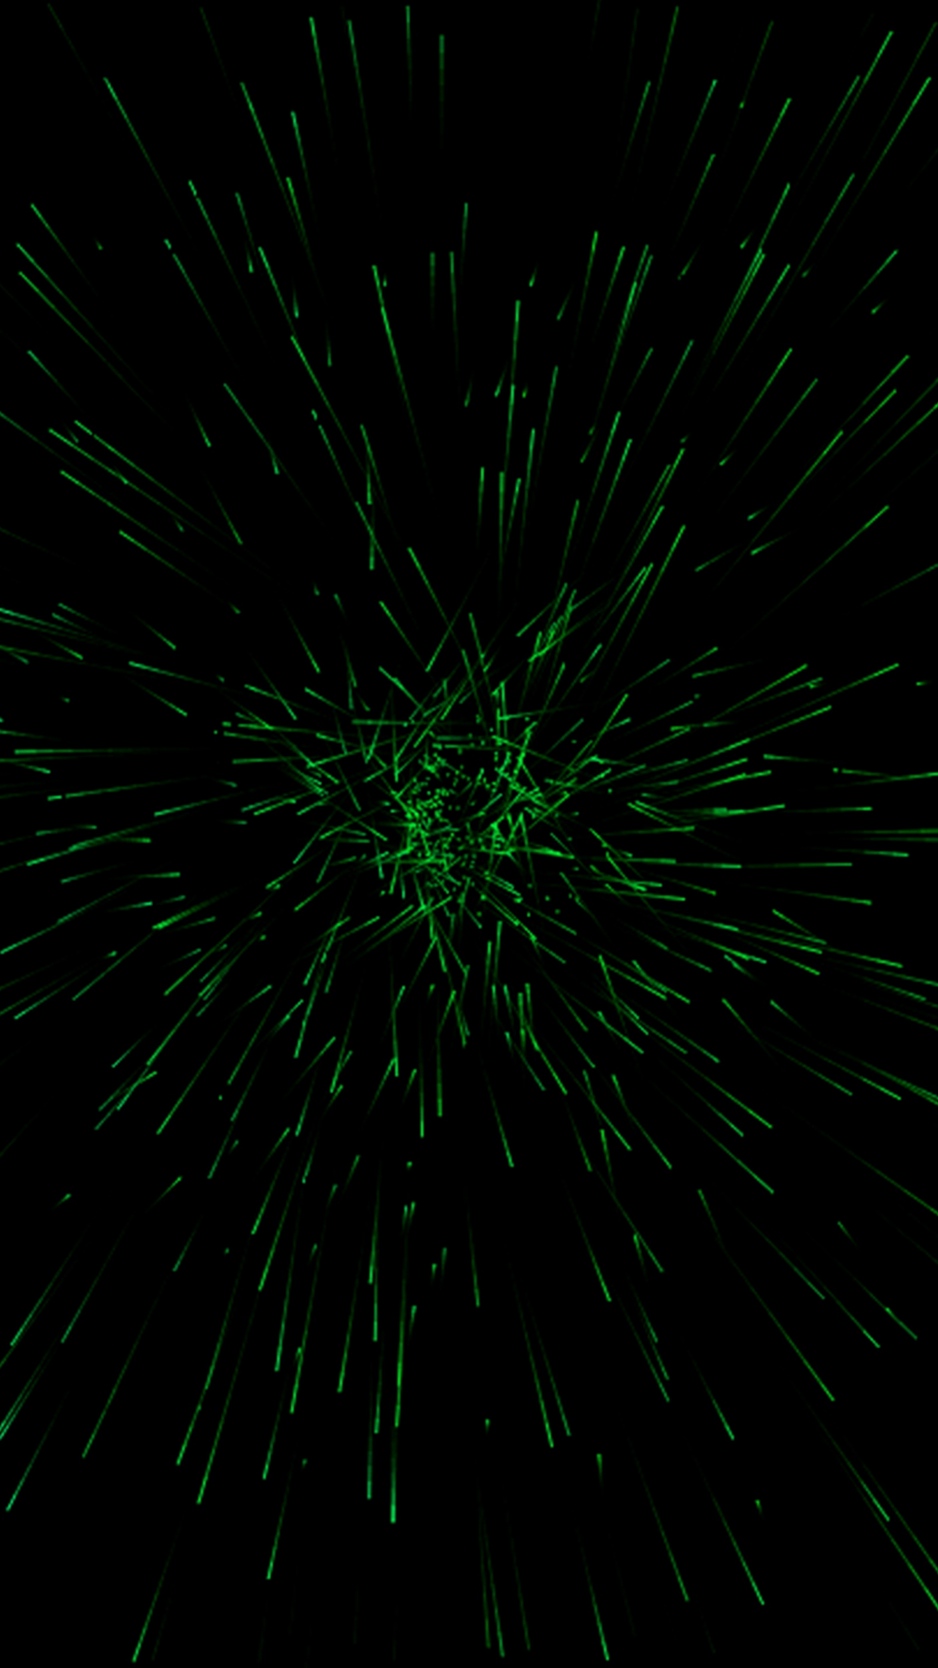 optical illusion iphone wallpaper,green,fireworks,black,nature,darkness